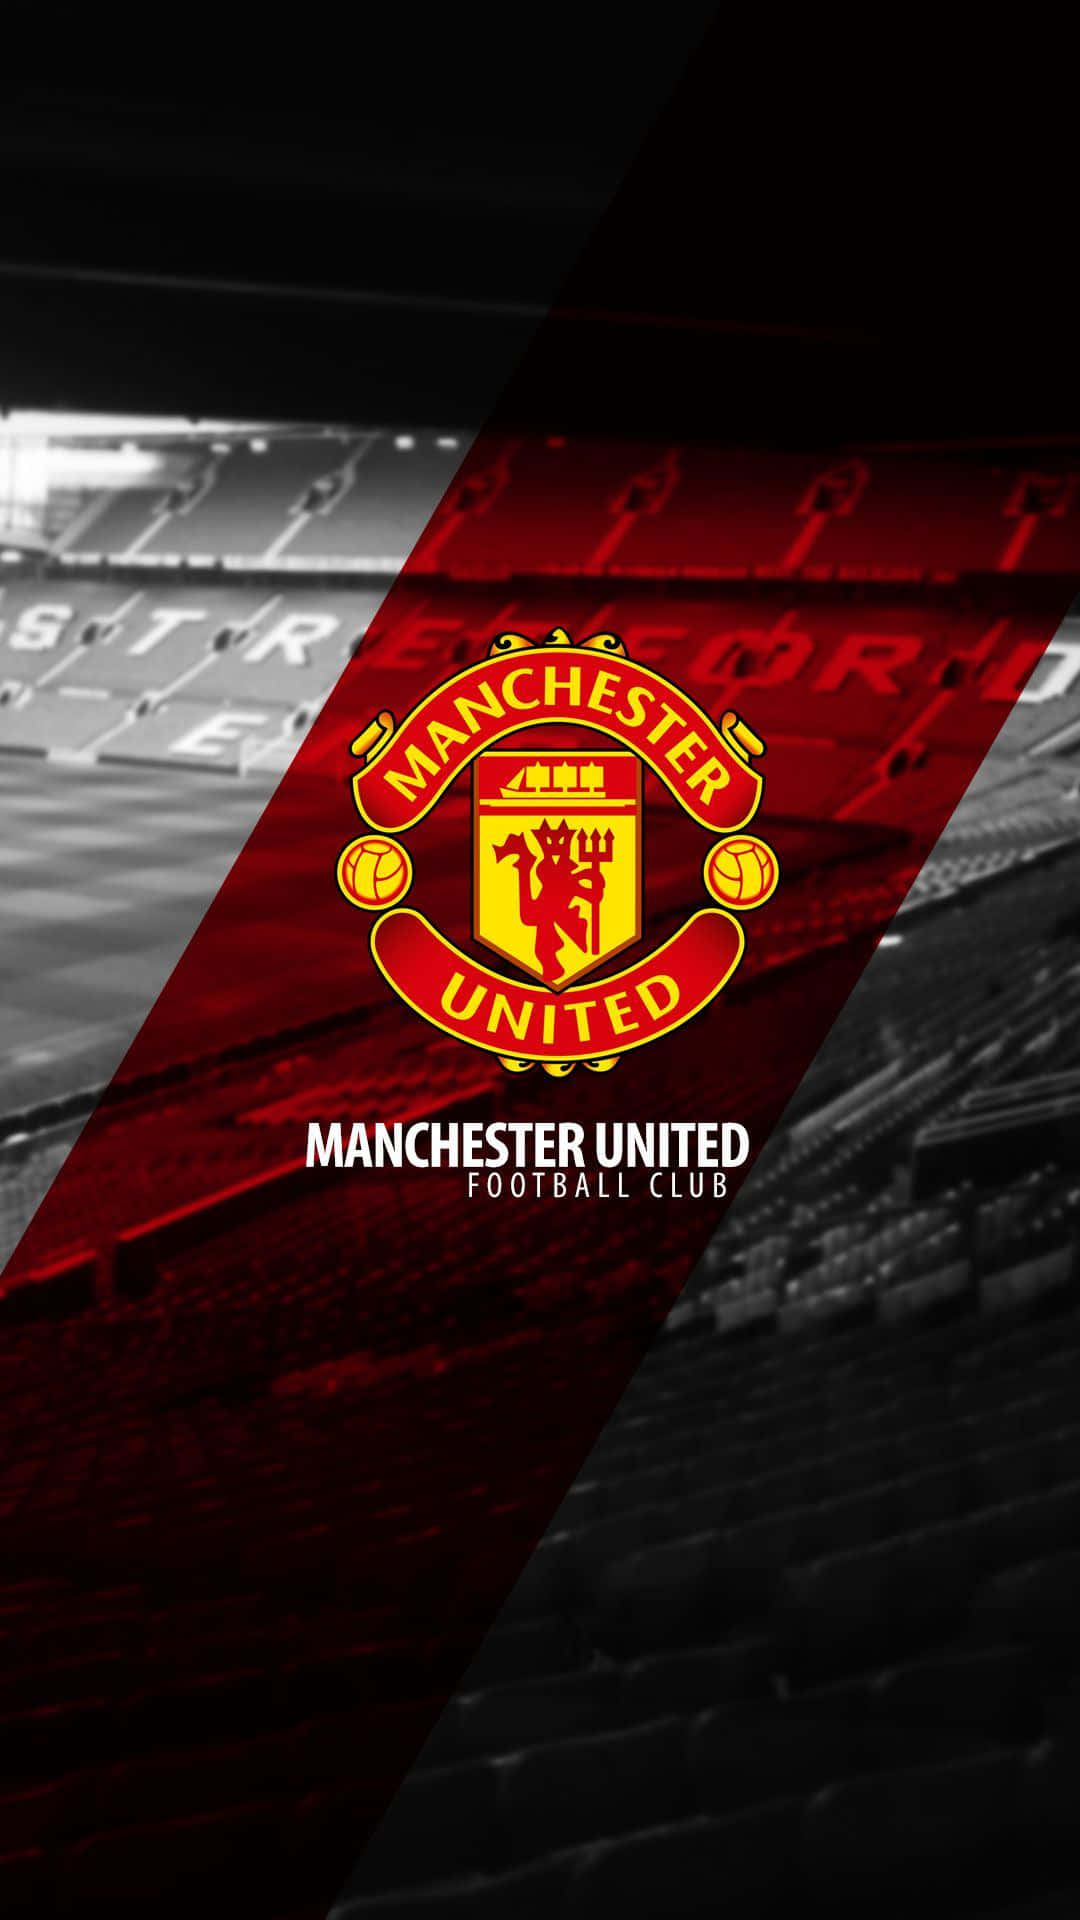 Show your support and download a special Manchester United iphone wallpaper. Wallpaper